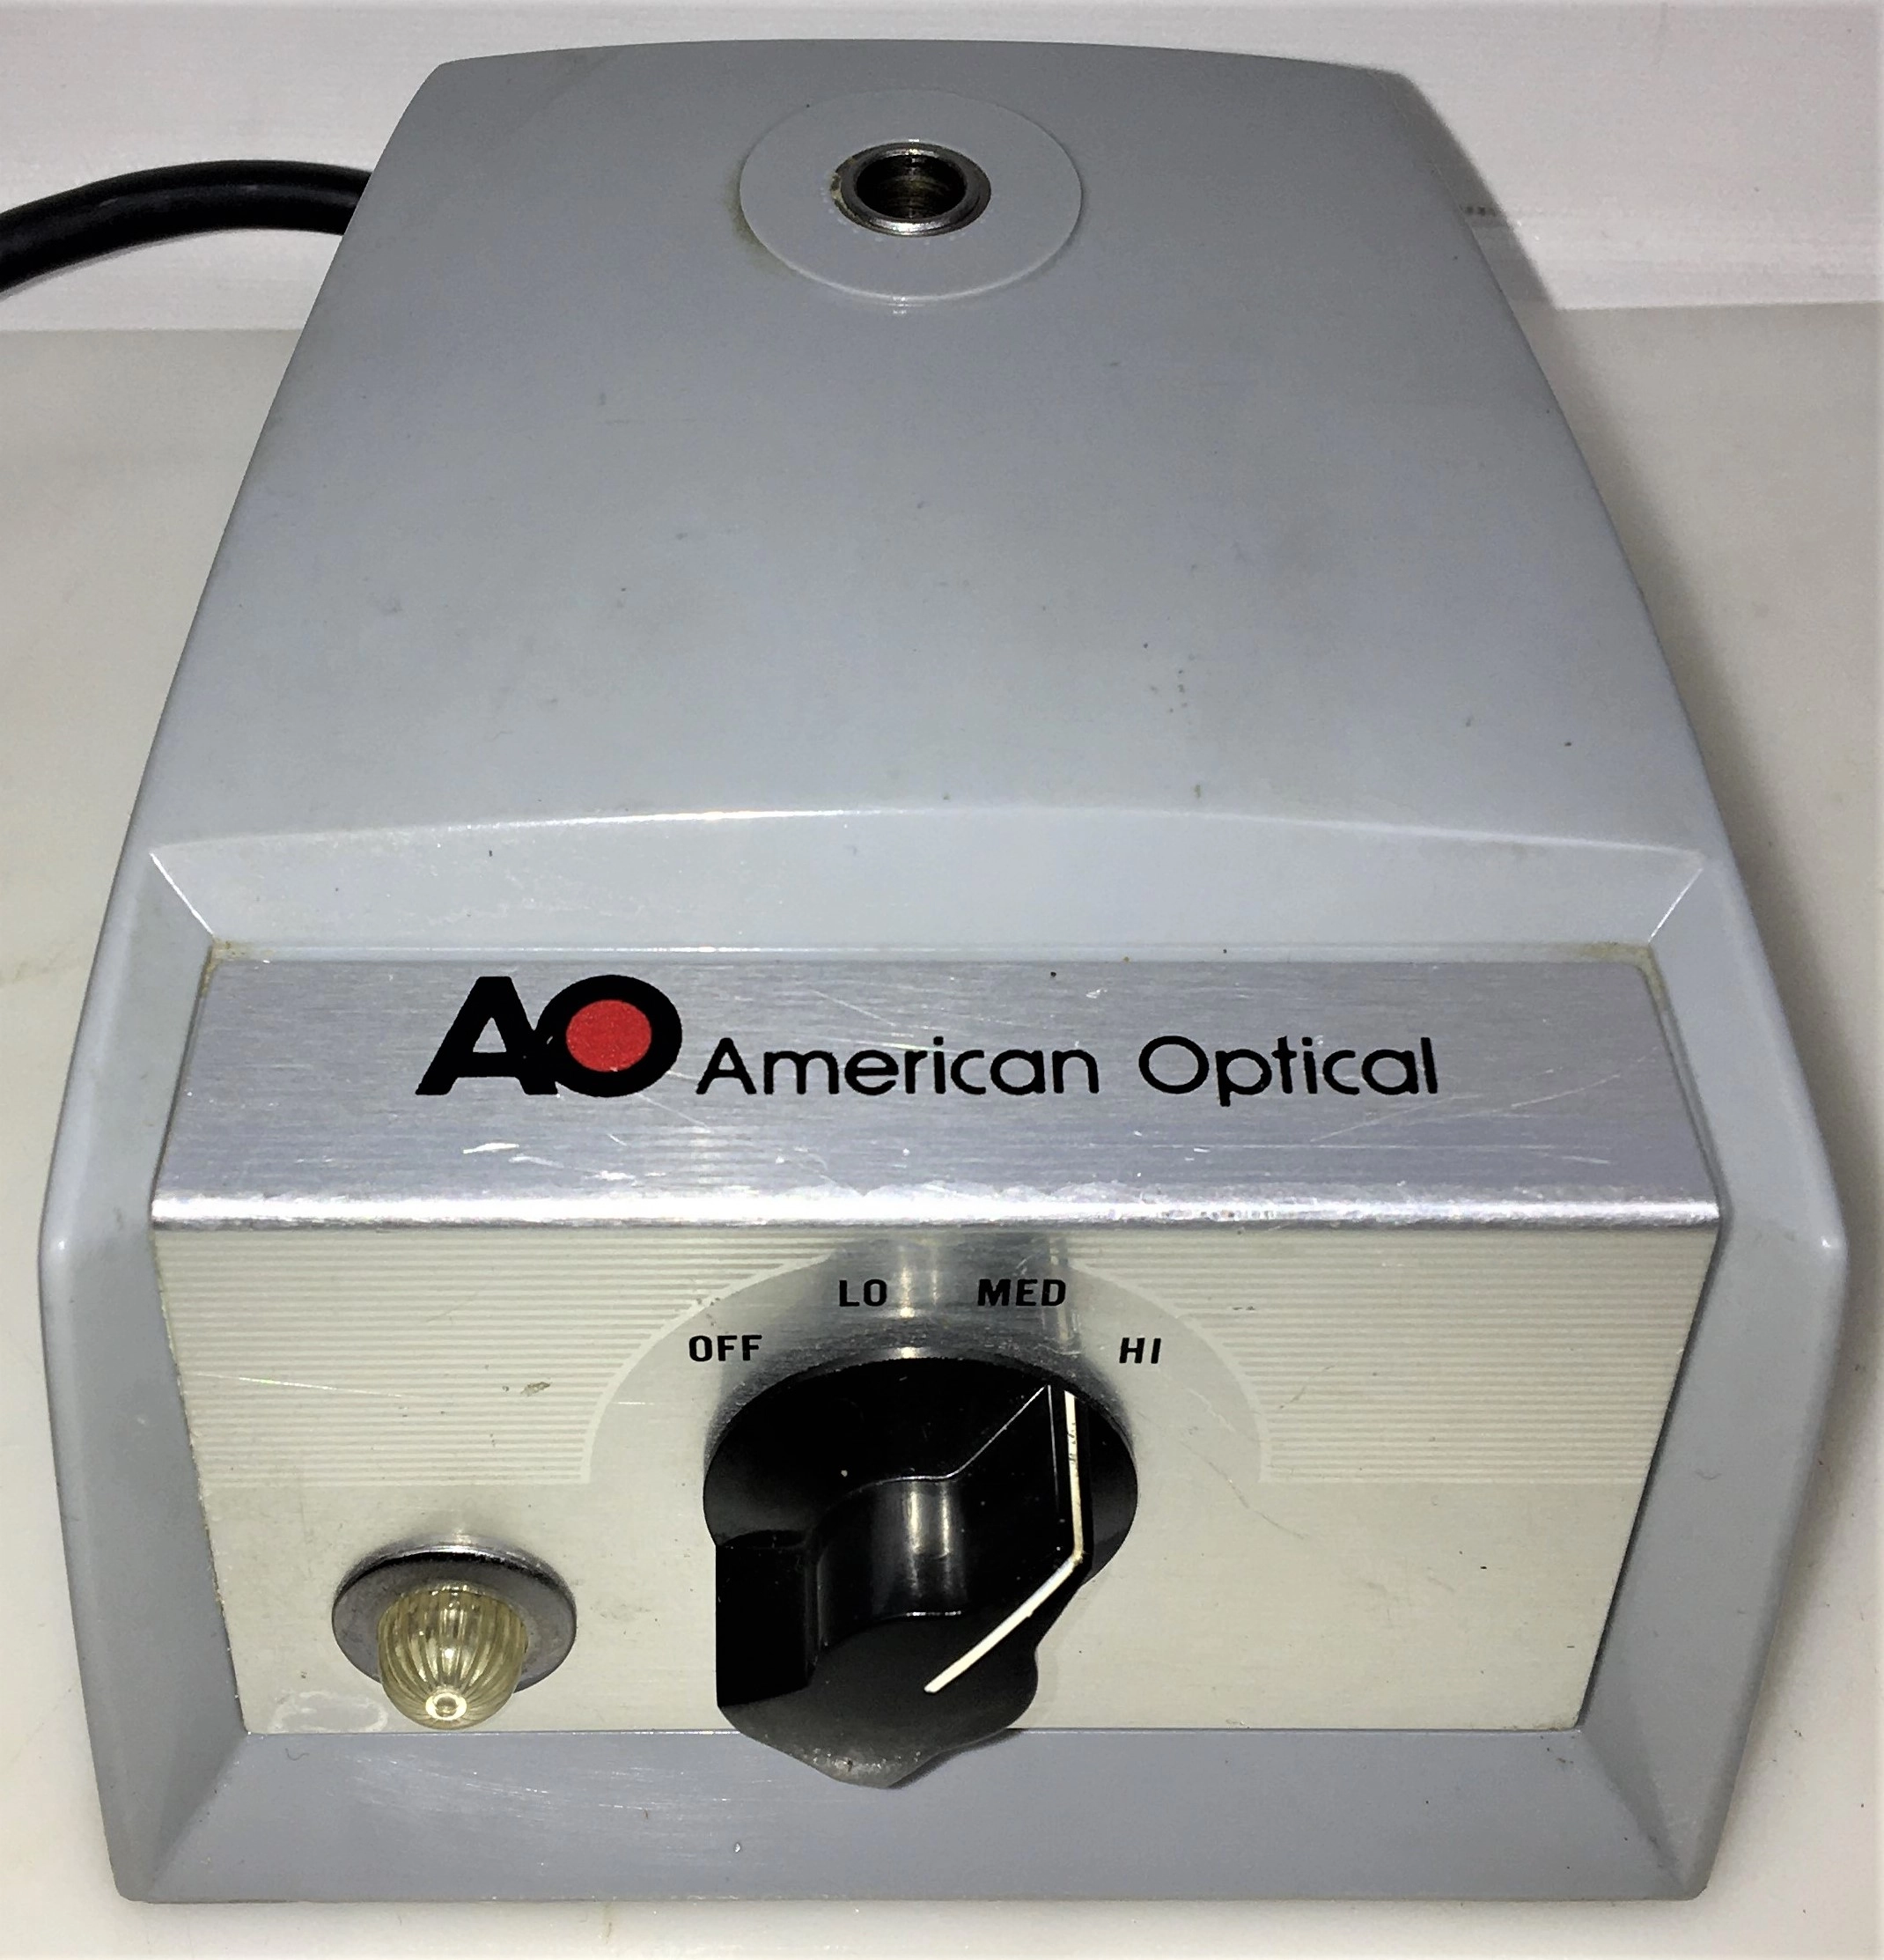 American Optical StarLite 365 Variable Transformer with Lamp